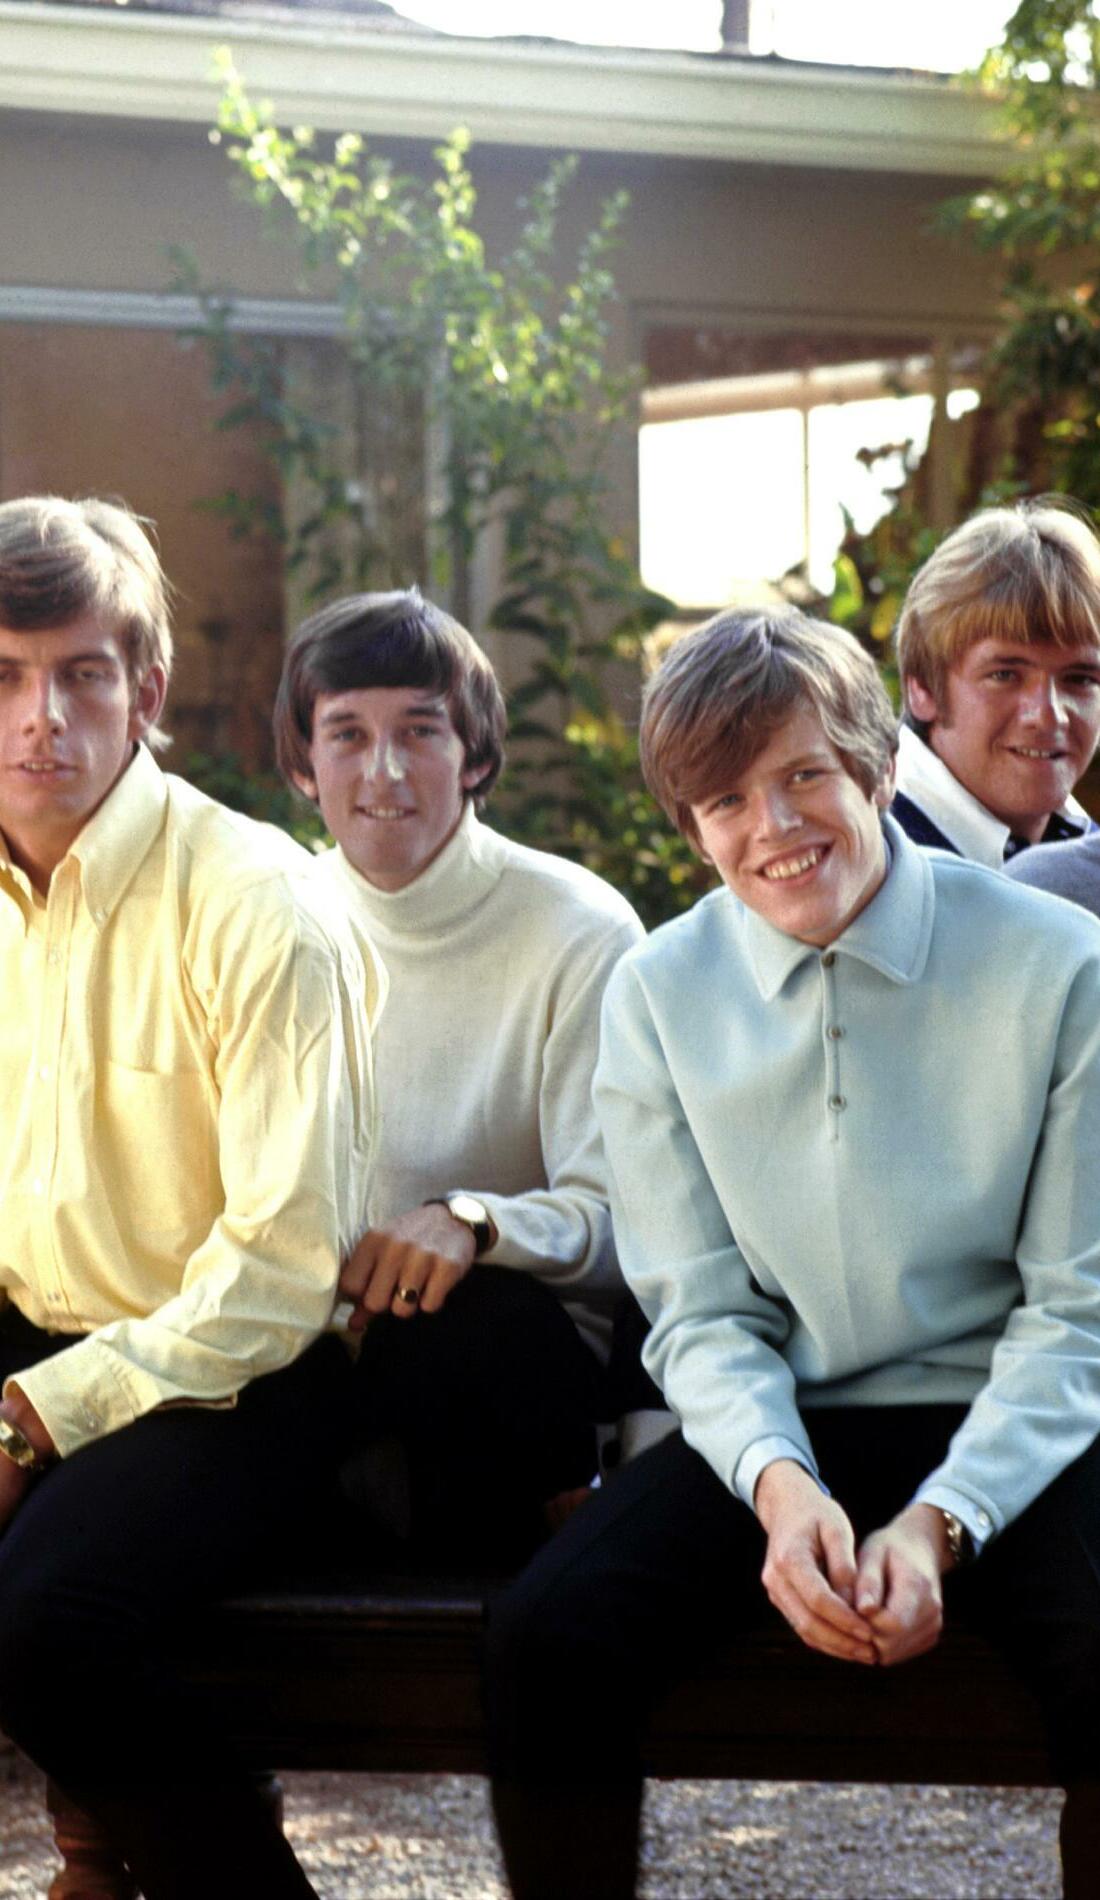 A Herman's Hermits live event